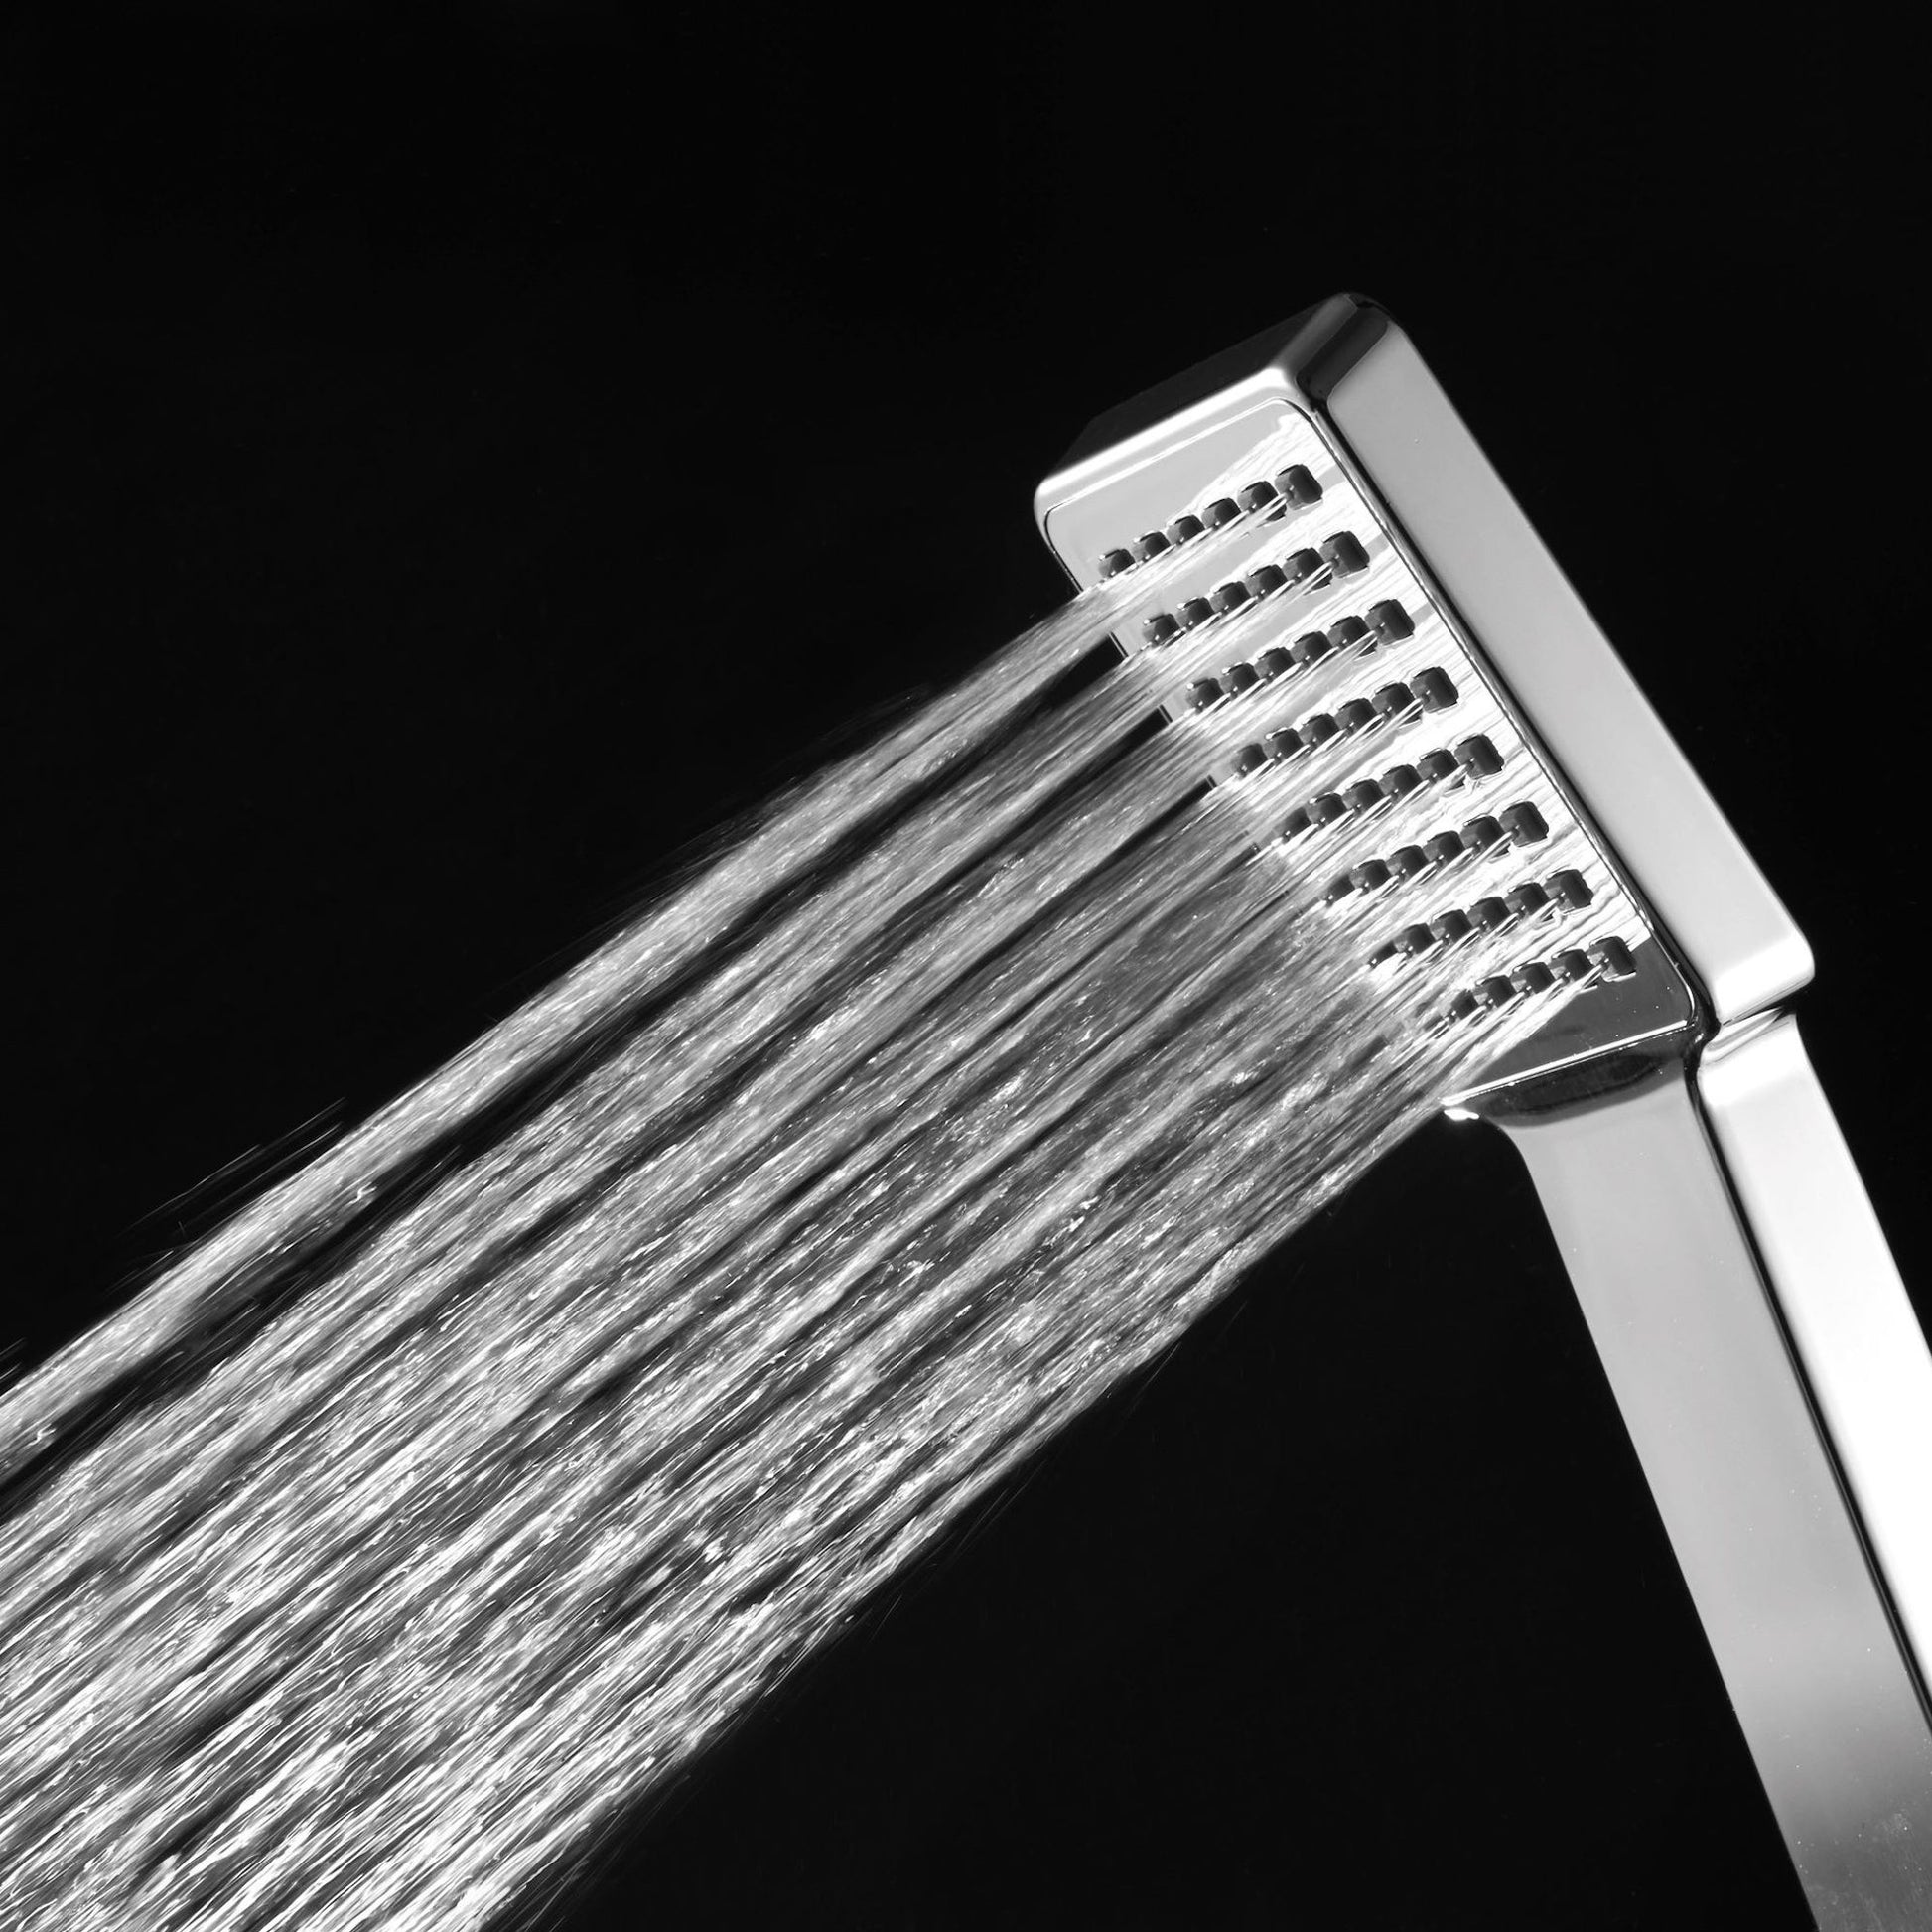 Square paddle hand shower - chrome effect - Showers